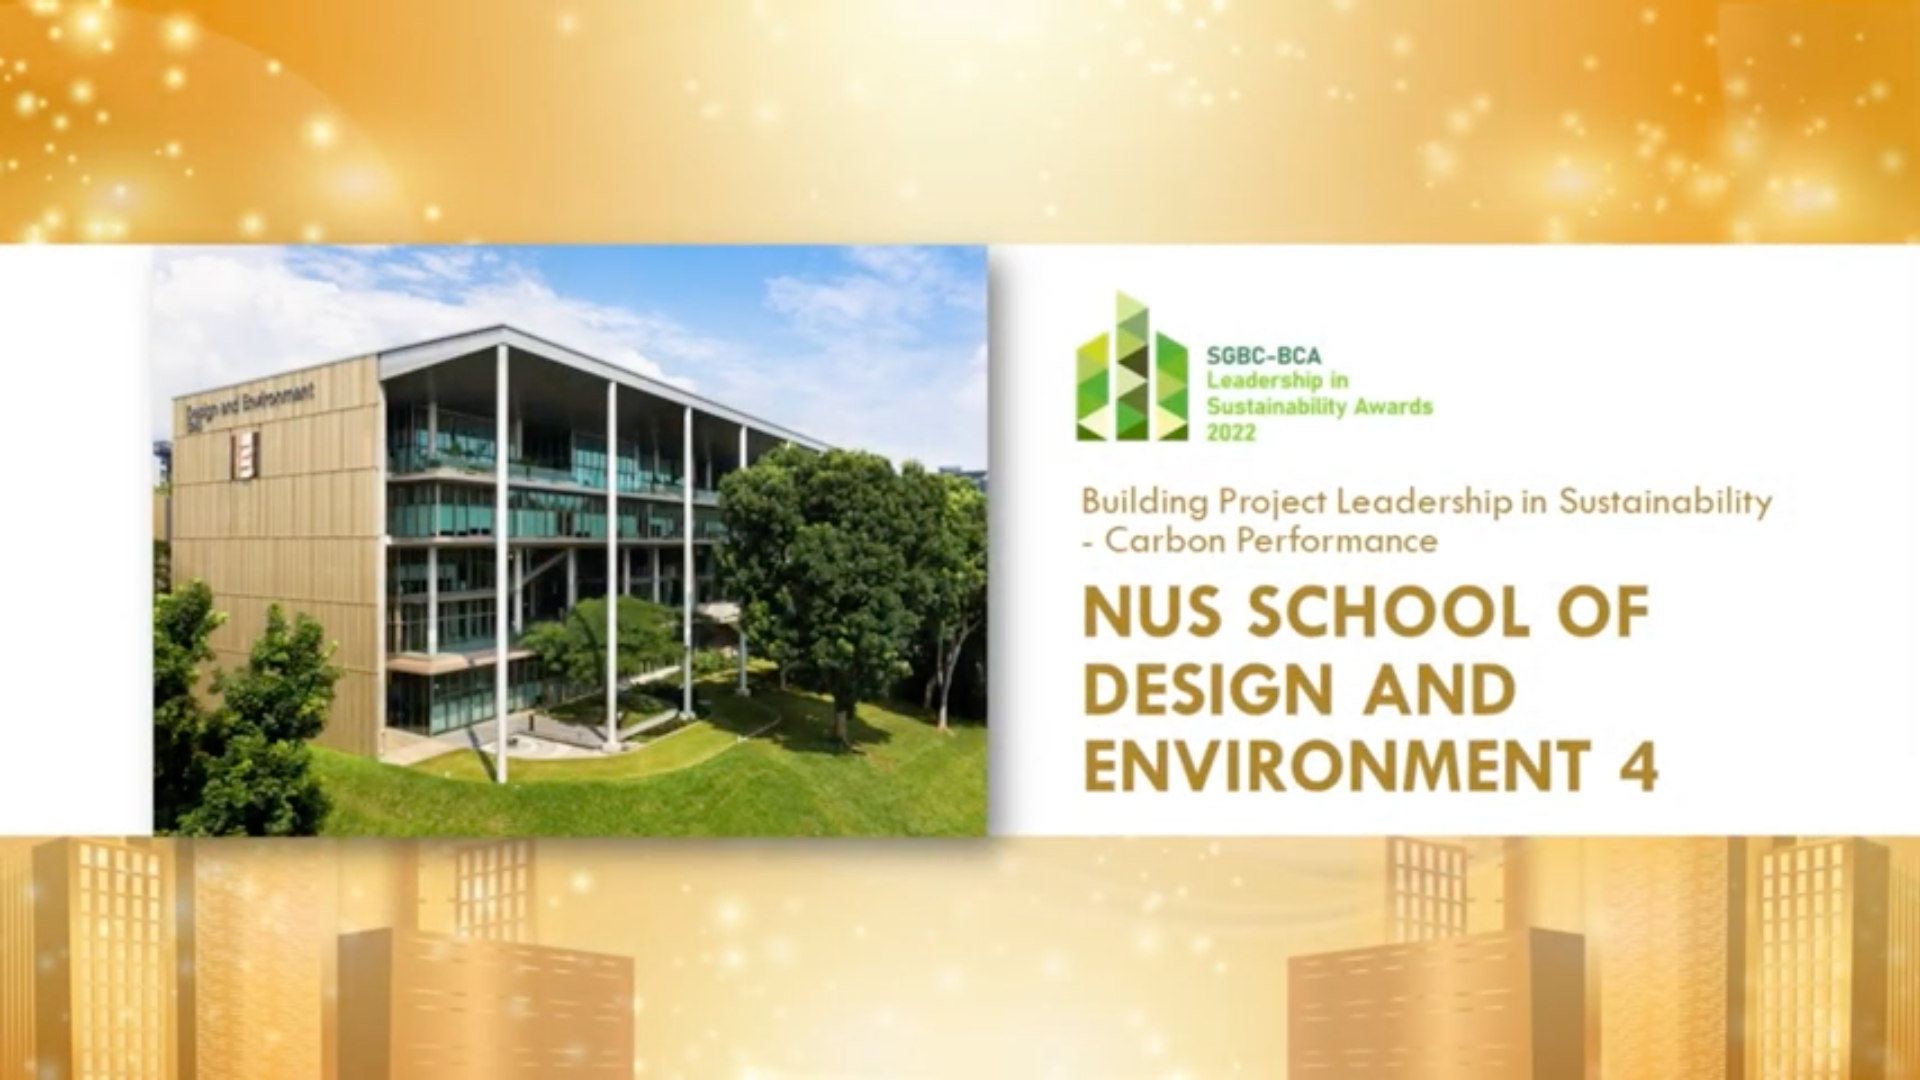 SDE4 was designed as a hub for the test-bedding of green building technology.